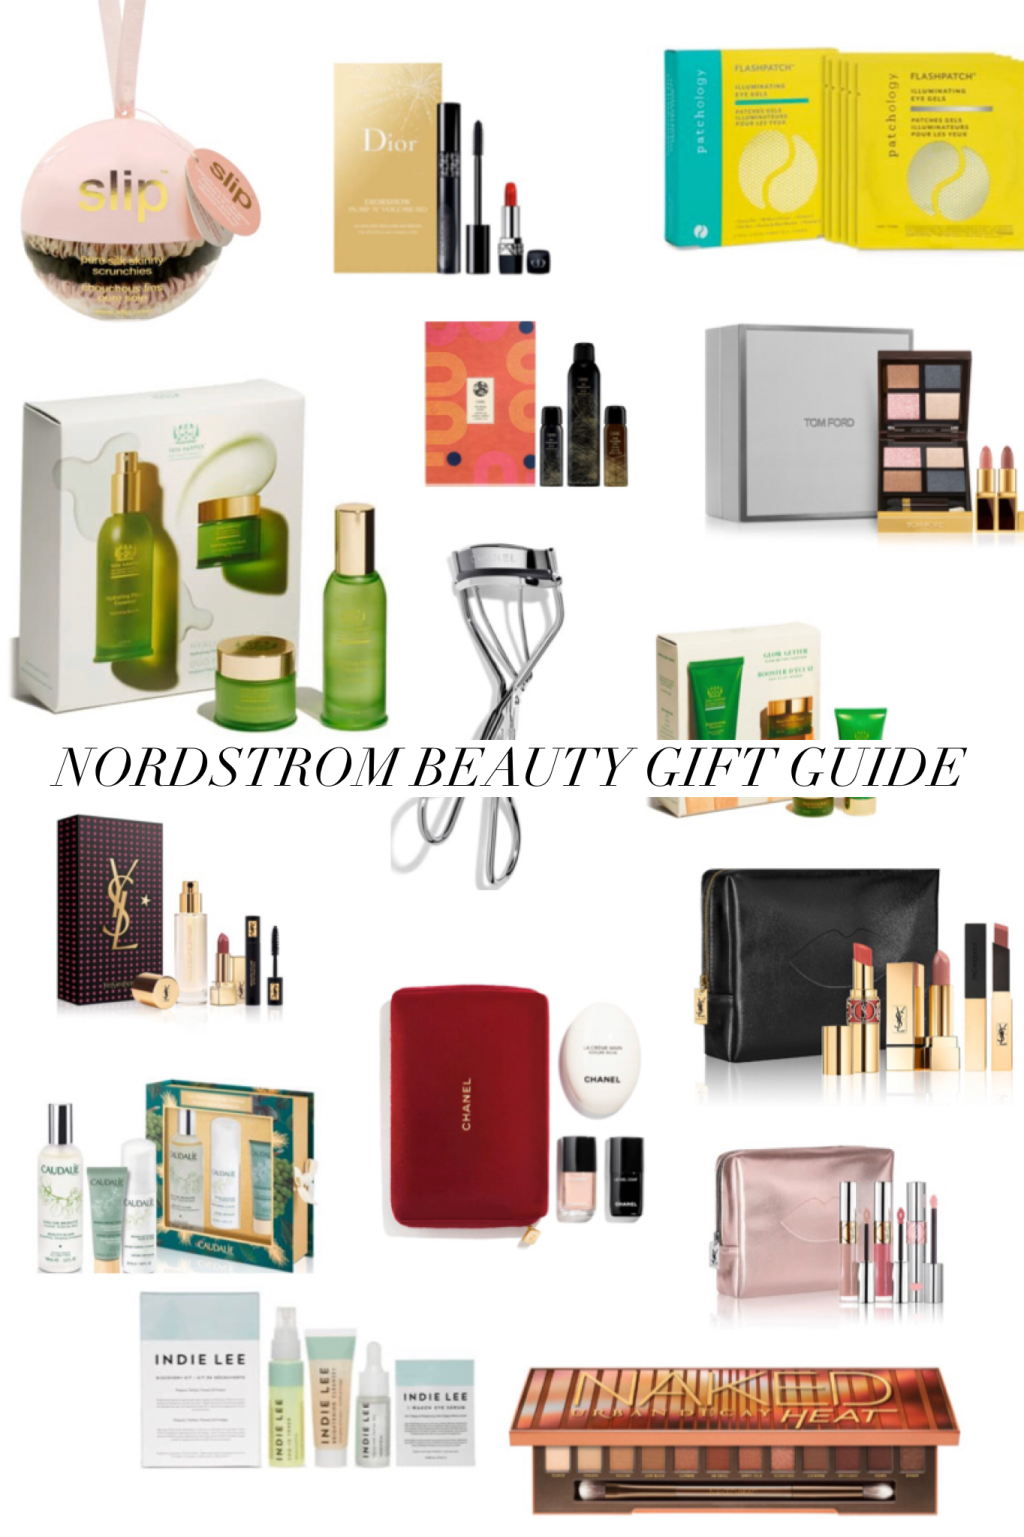 Nordstrom Beauty Gift Guide + GIVEAWAY